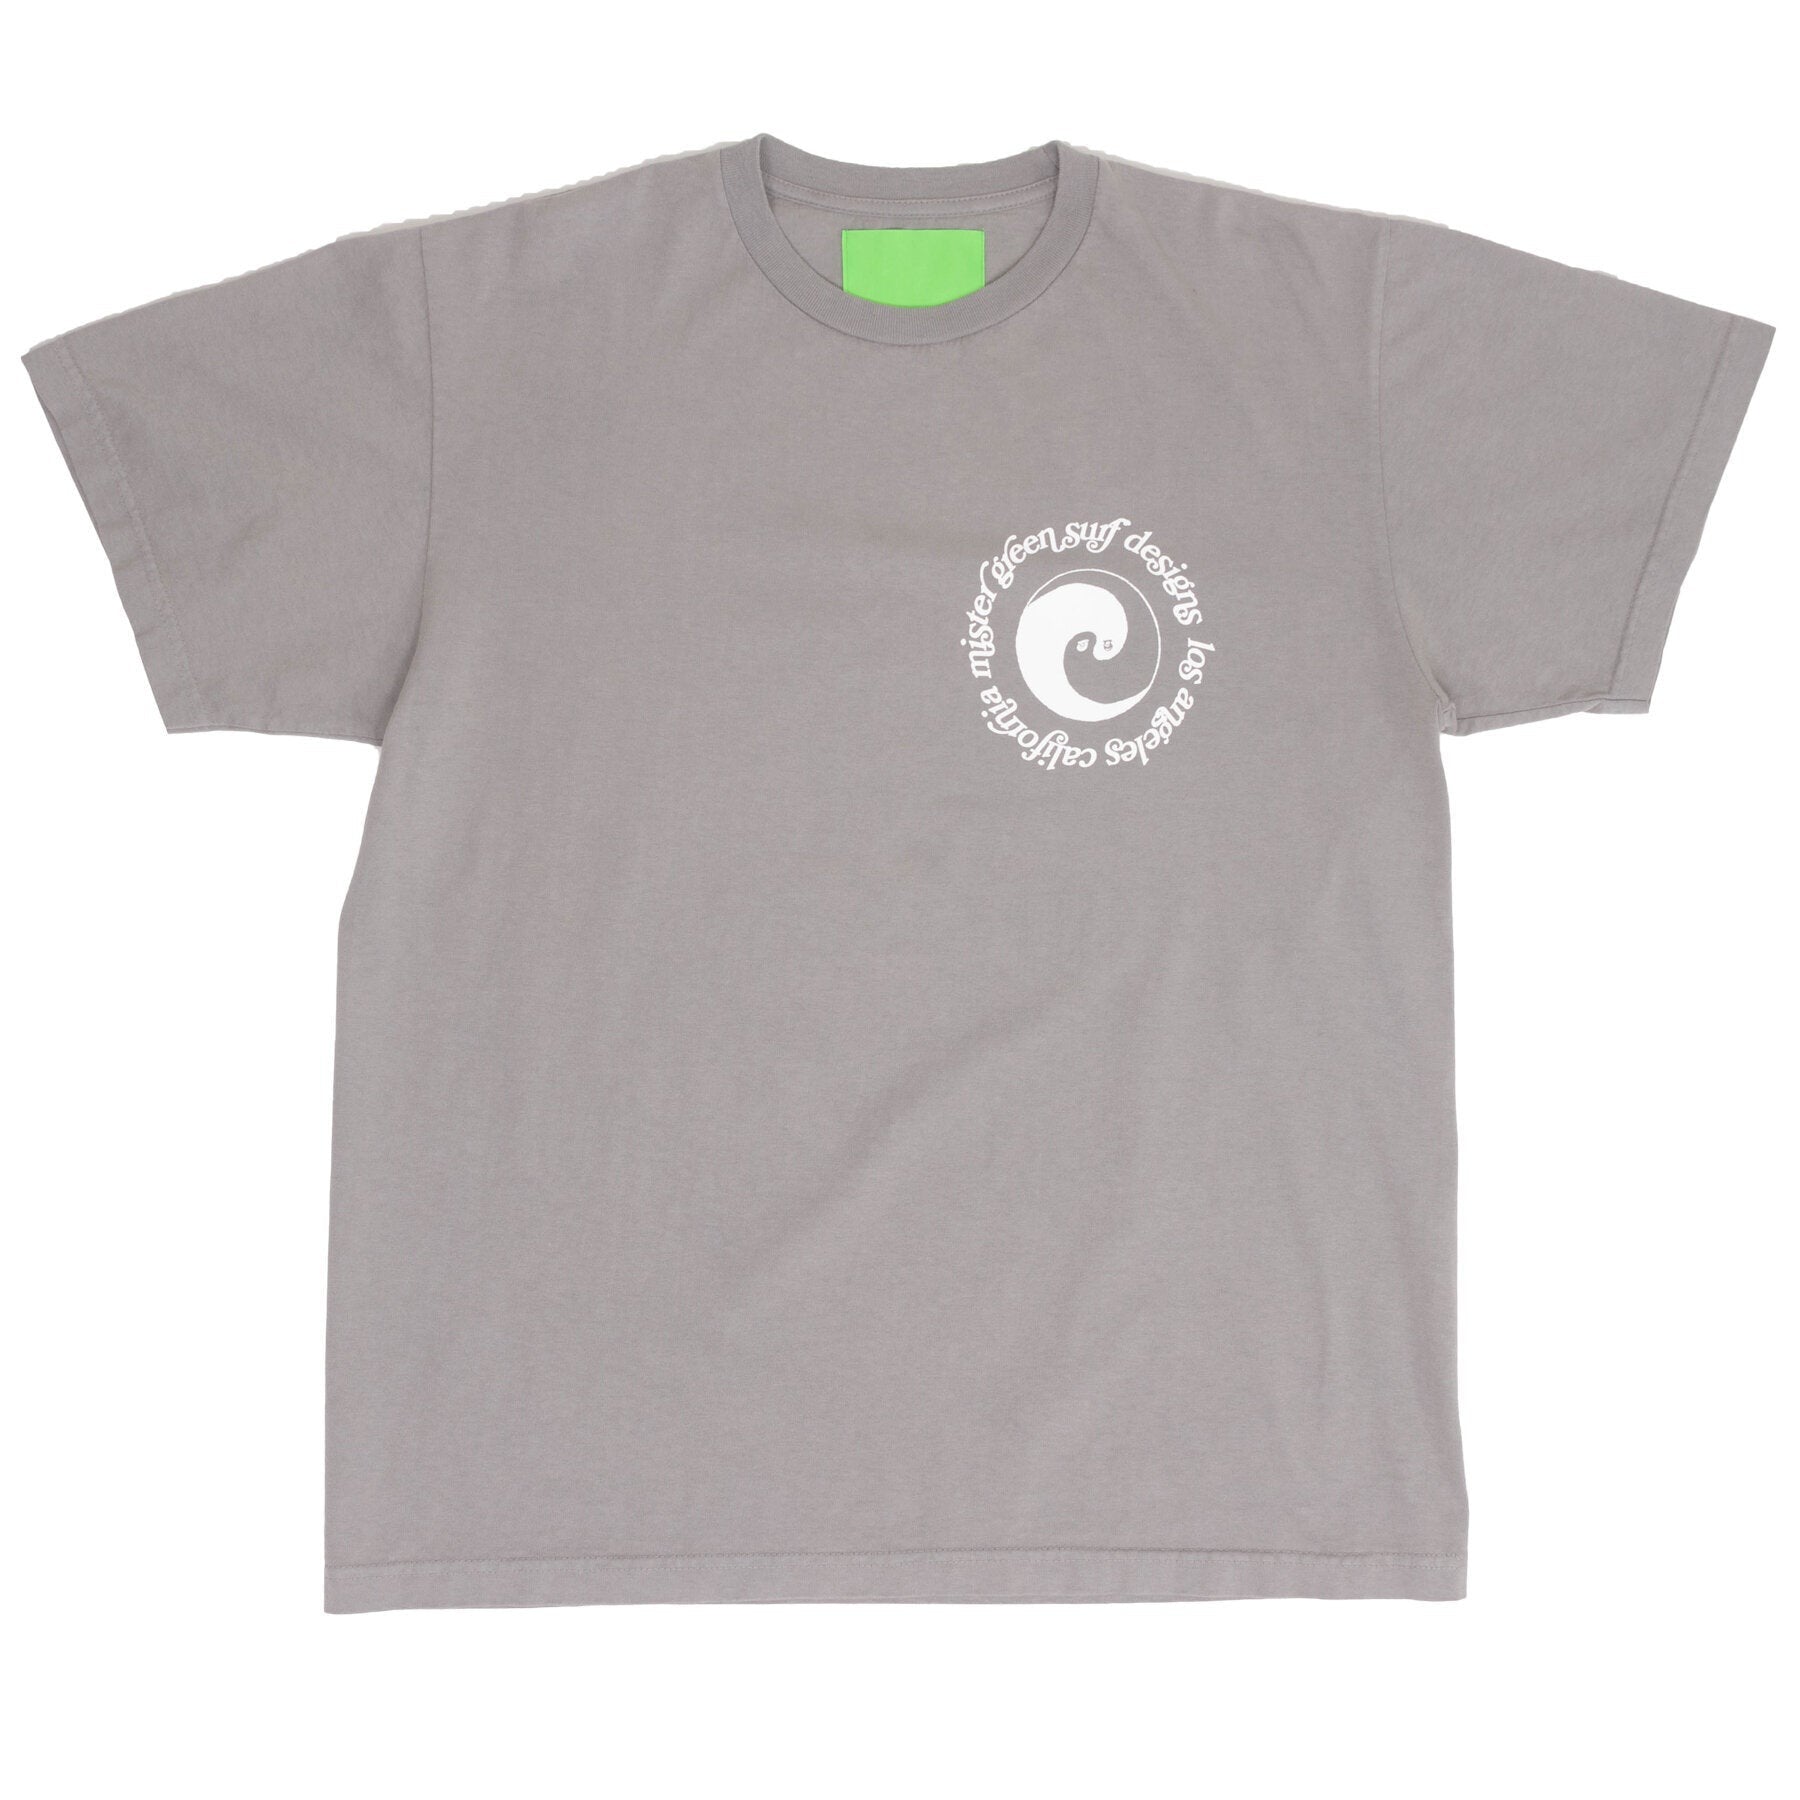 Dualism Surf Tee - Washed Grey-Mister Green-Mister Green